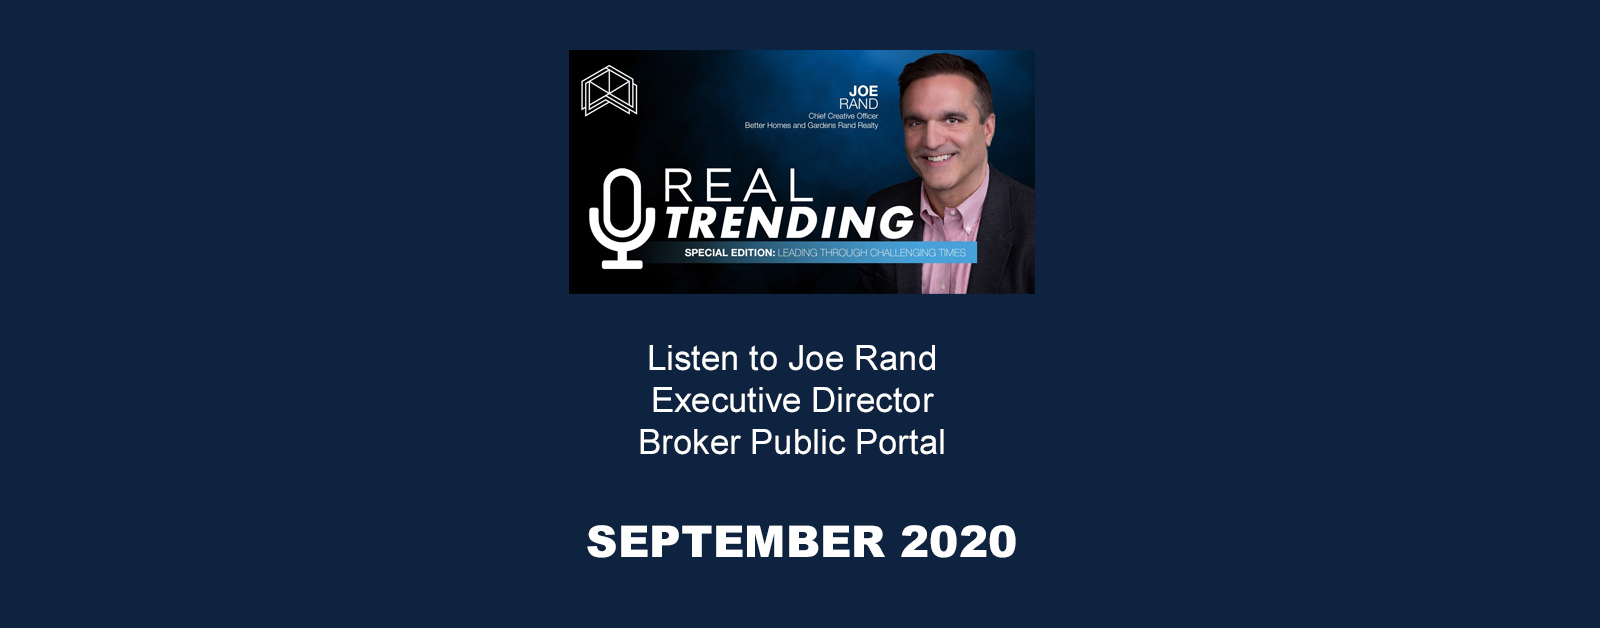 REAL Trends - REAL TRENDING Podcast